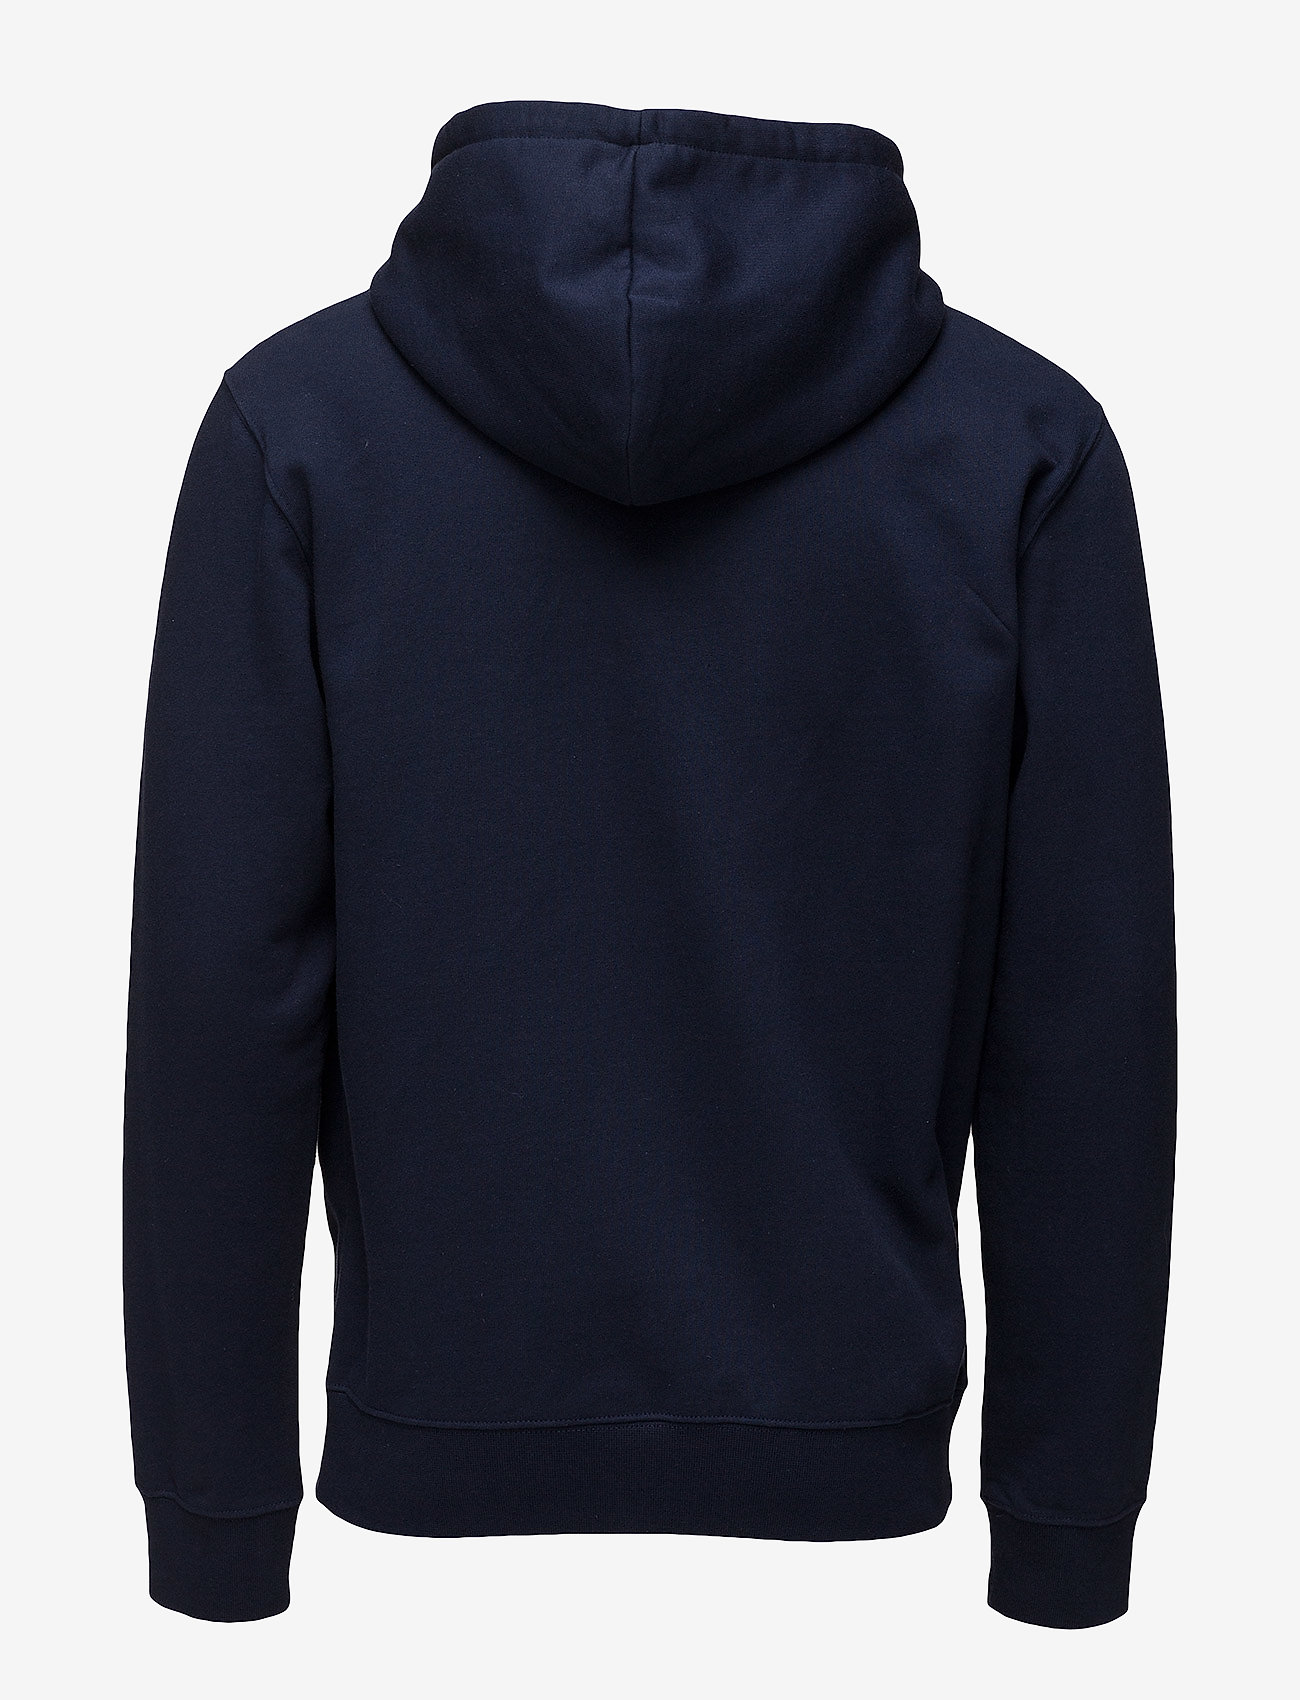 Double A by Wood Wood - Ian hoodie - hupparit - navy - 1